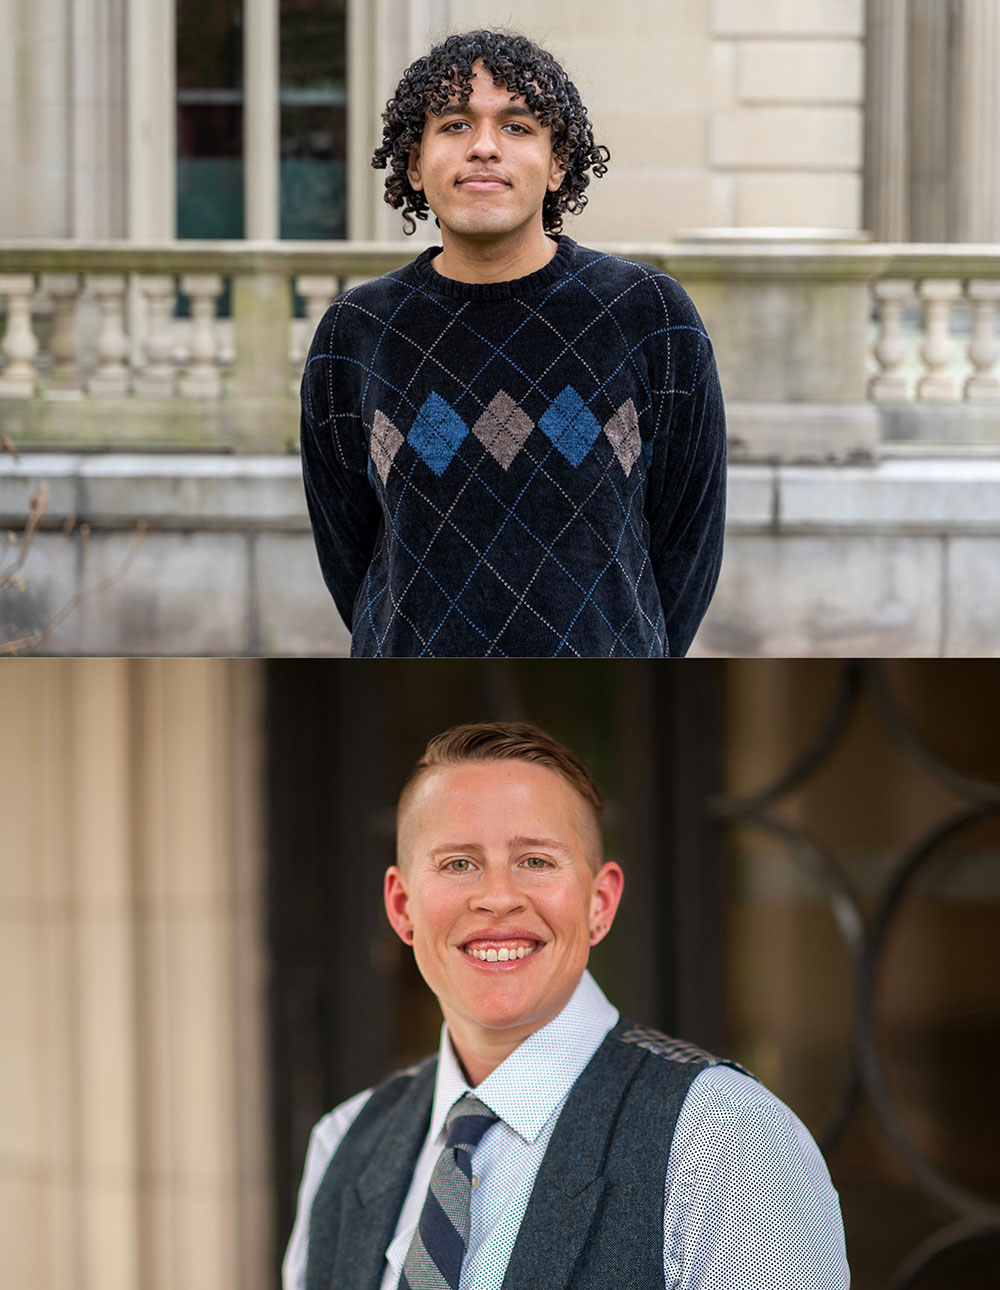 Two photos: Photo 1) A man with dark curly hair wearing a patterned sweater Photo 2) A person wearing a light blue dress shirt with a striped tie and vest